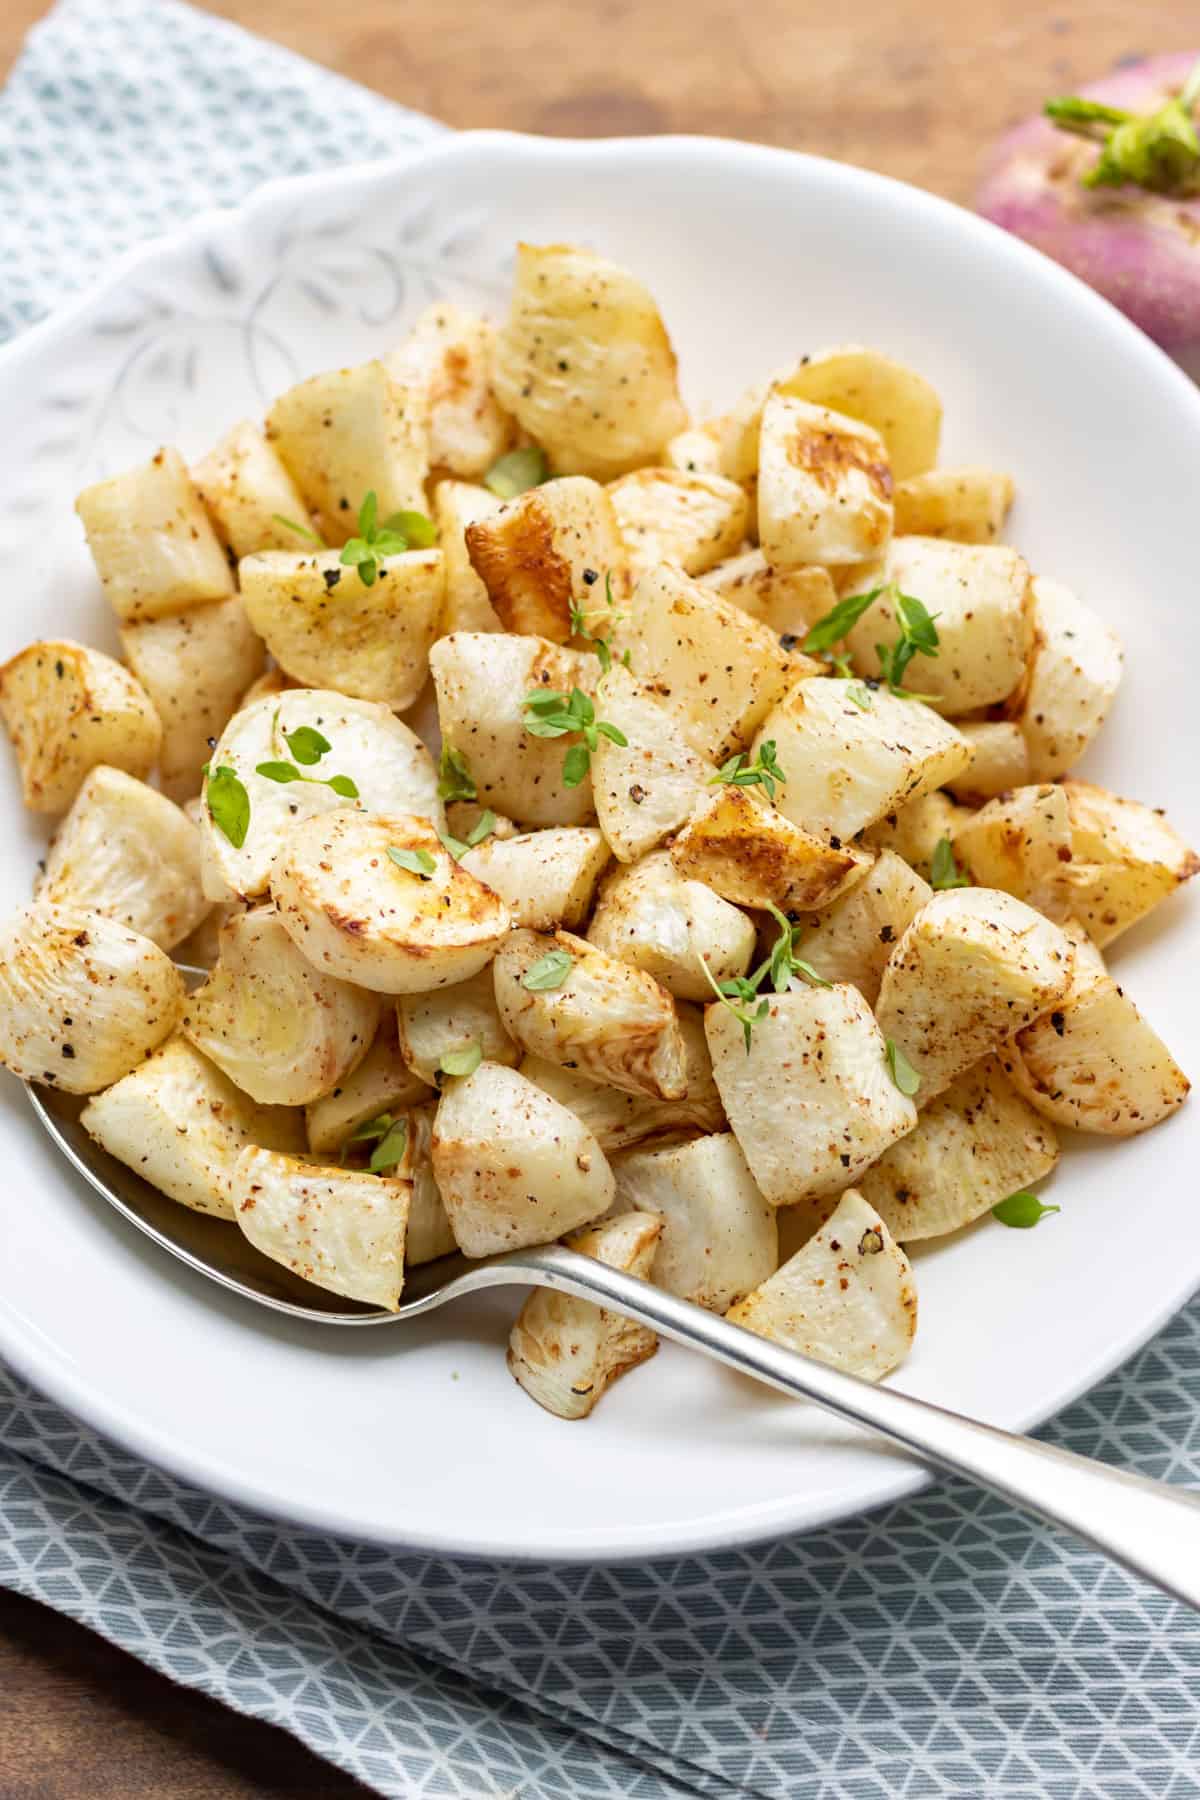 A plate of roasted turnip on a table.